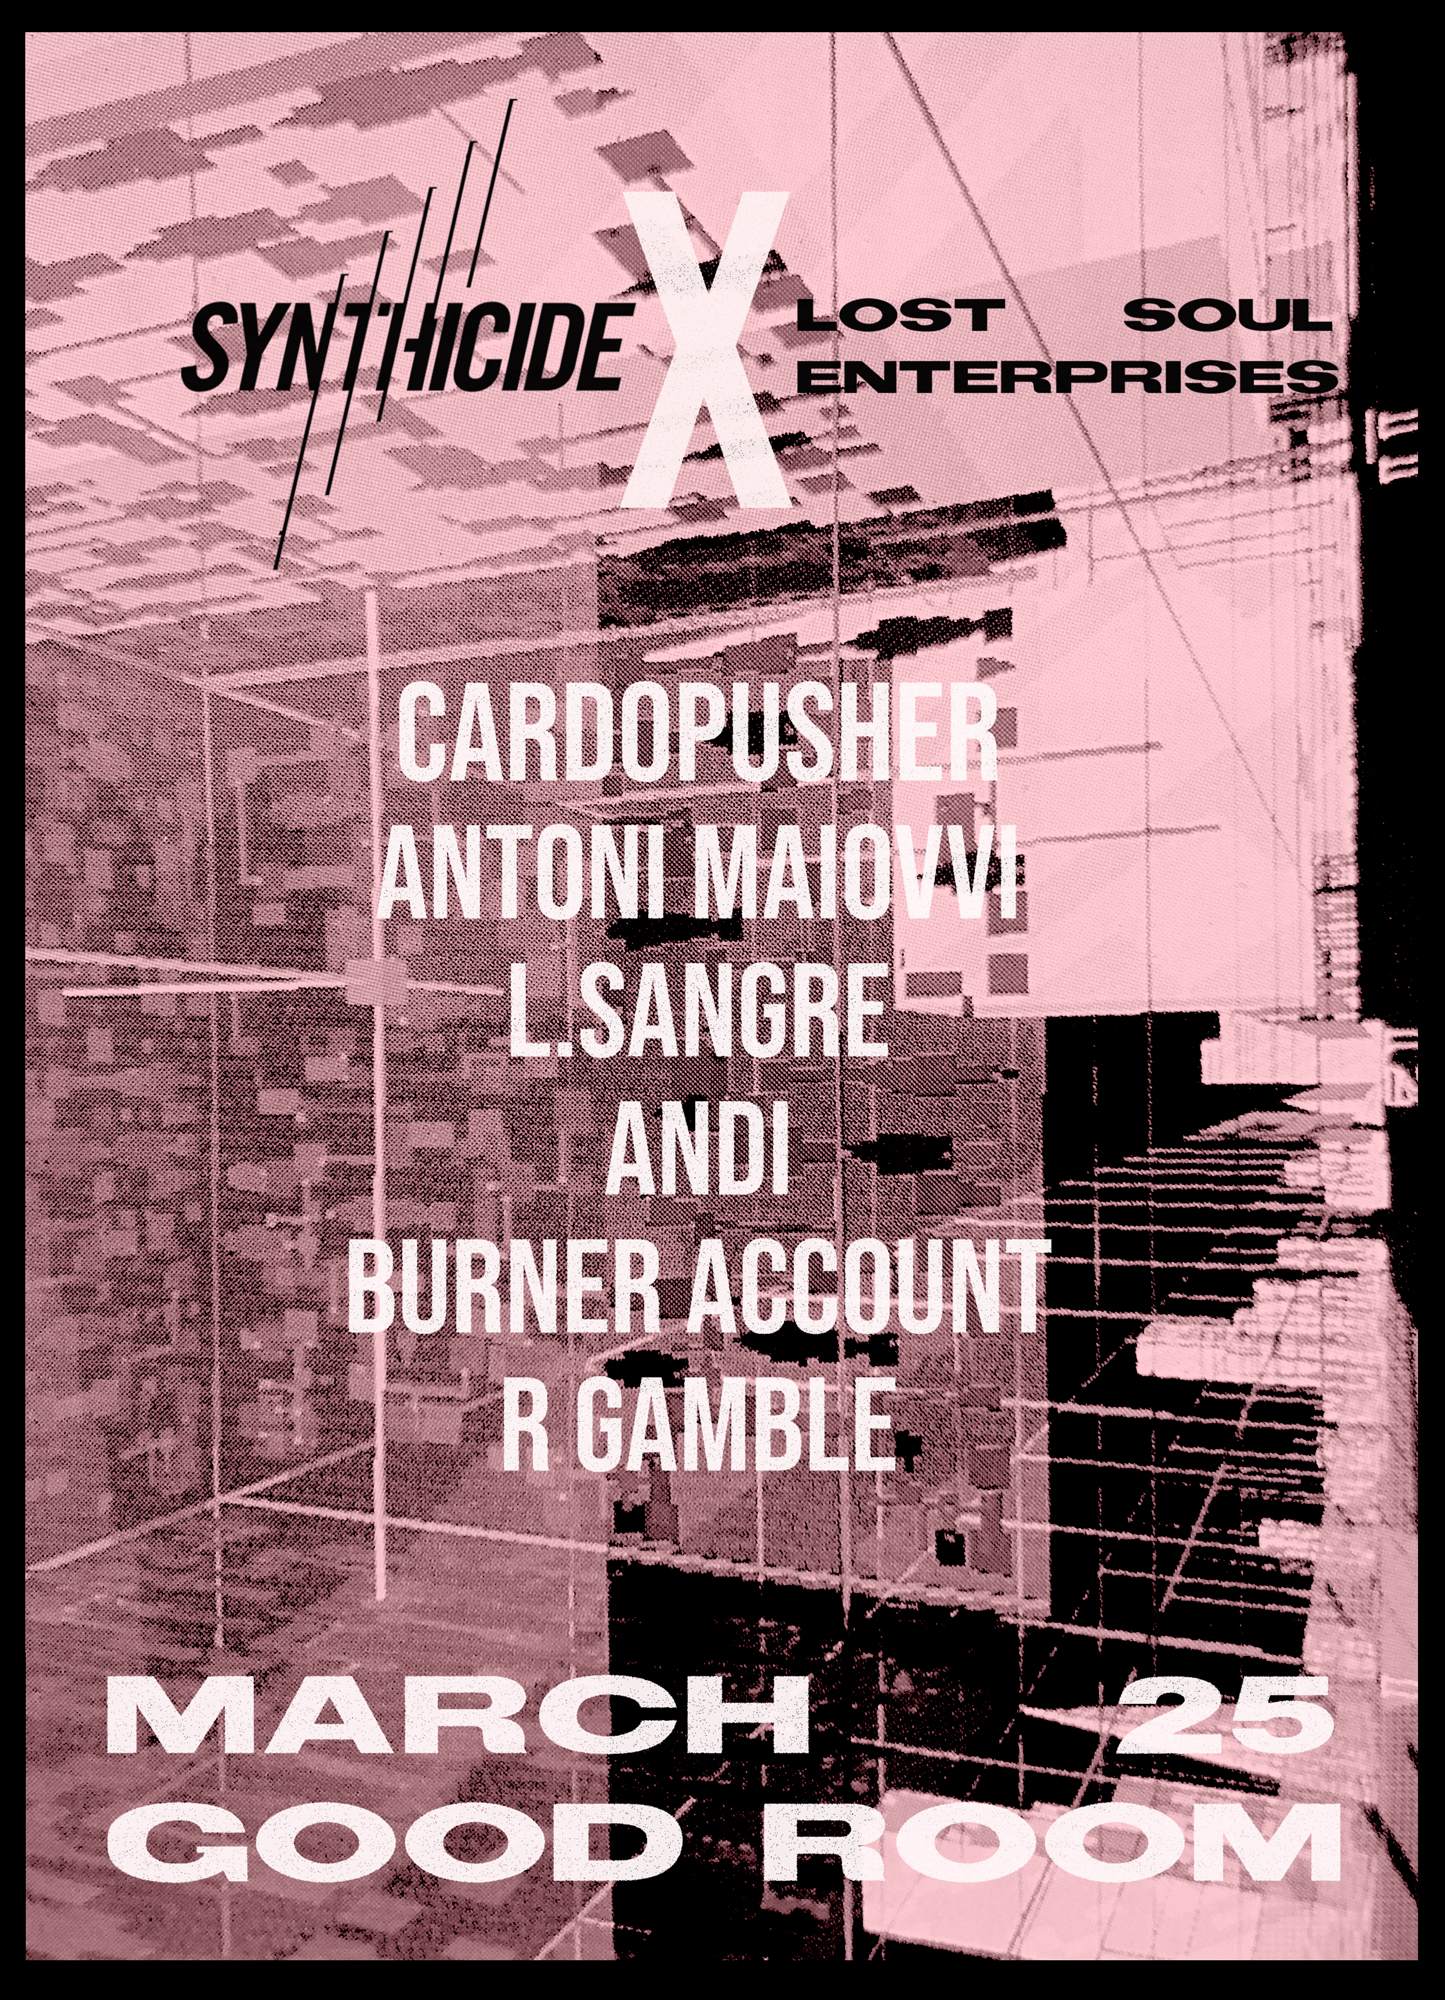 Synthicide x Lost Soul Enterprises with Cardopusher, Antoni Maiovvi - フライヤー表